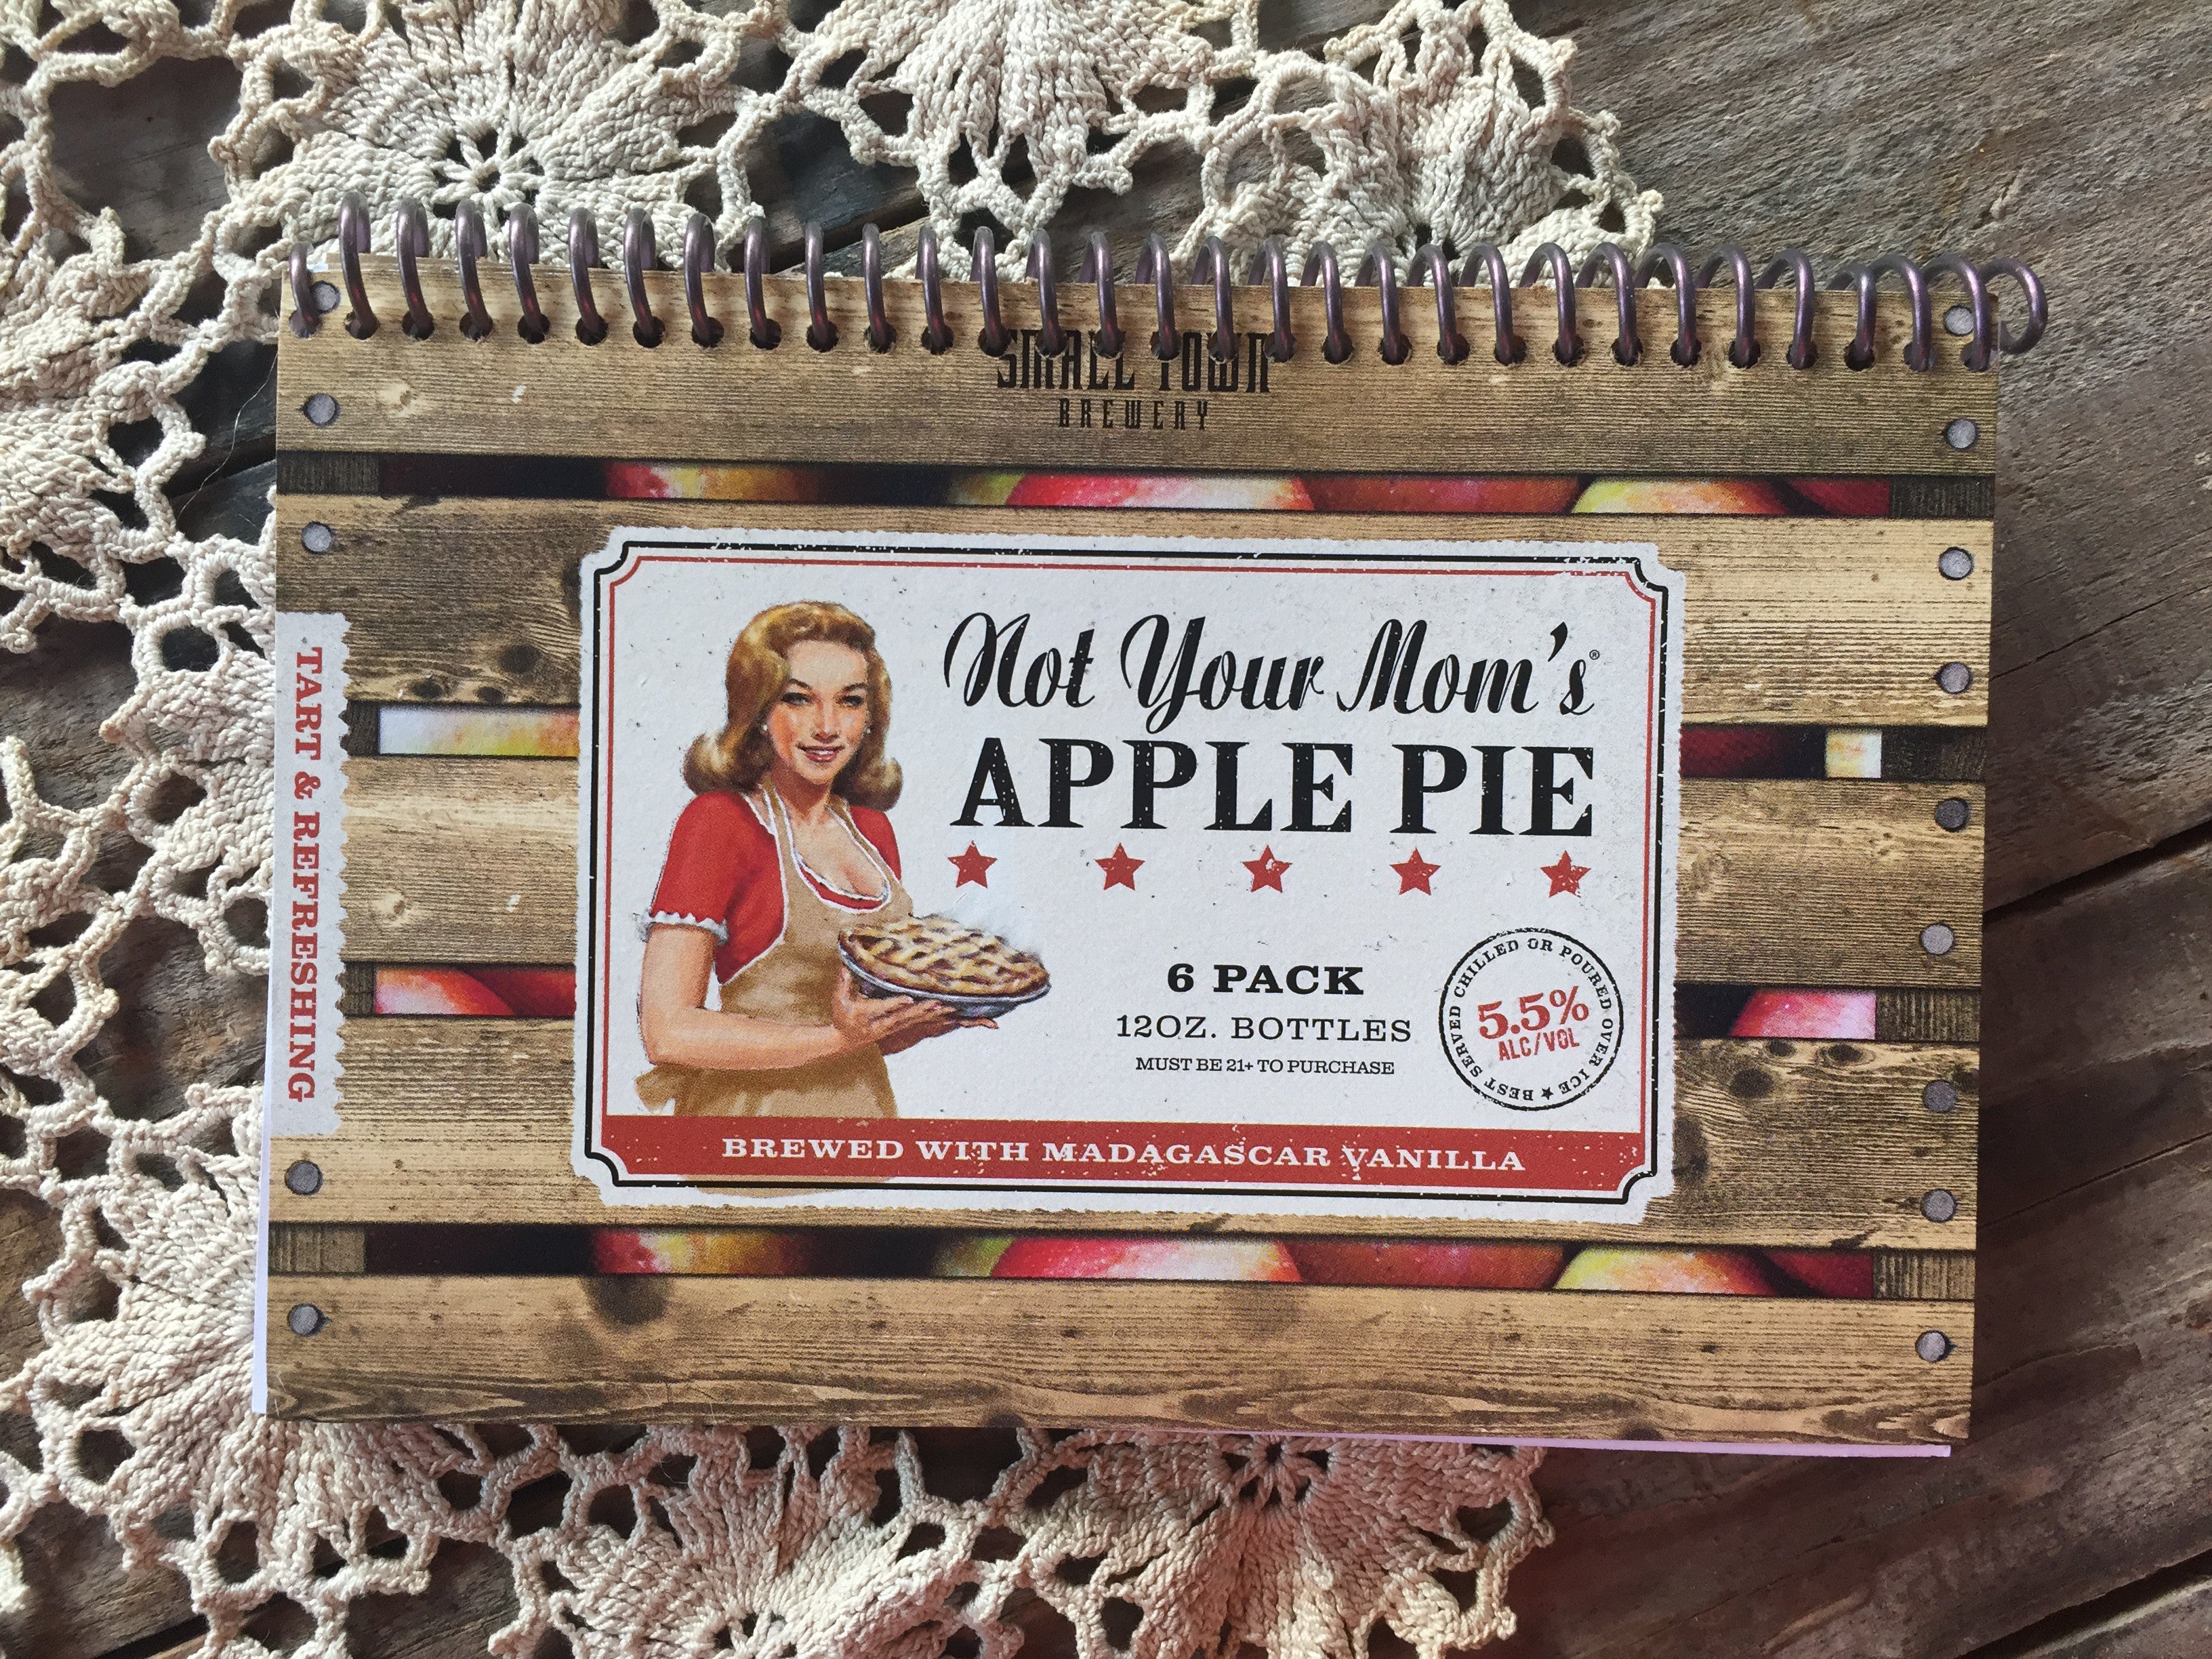 Not Your Mom's Apple Pie Recycled Beer Carton Notebook